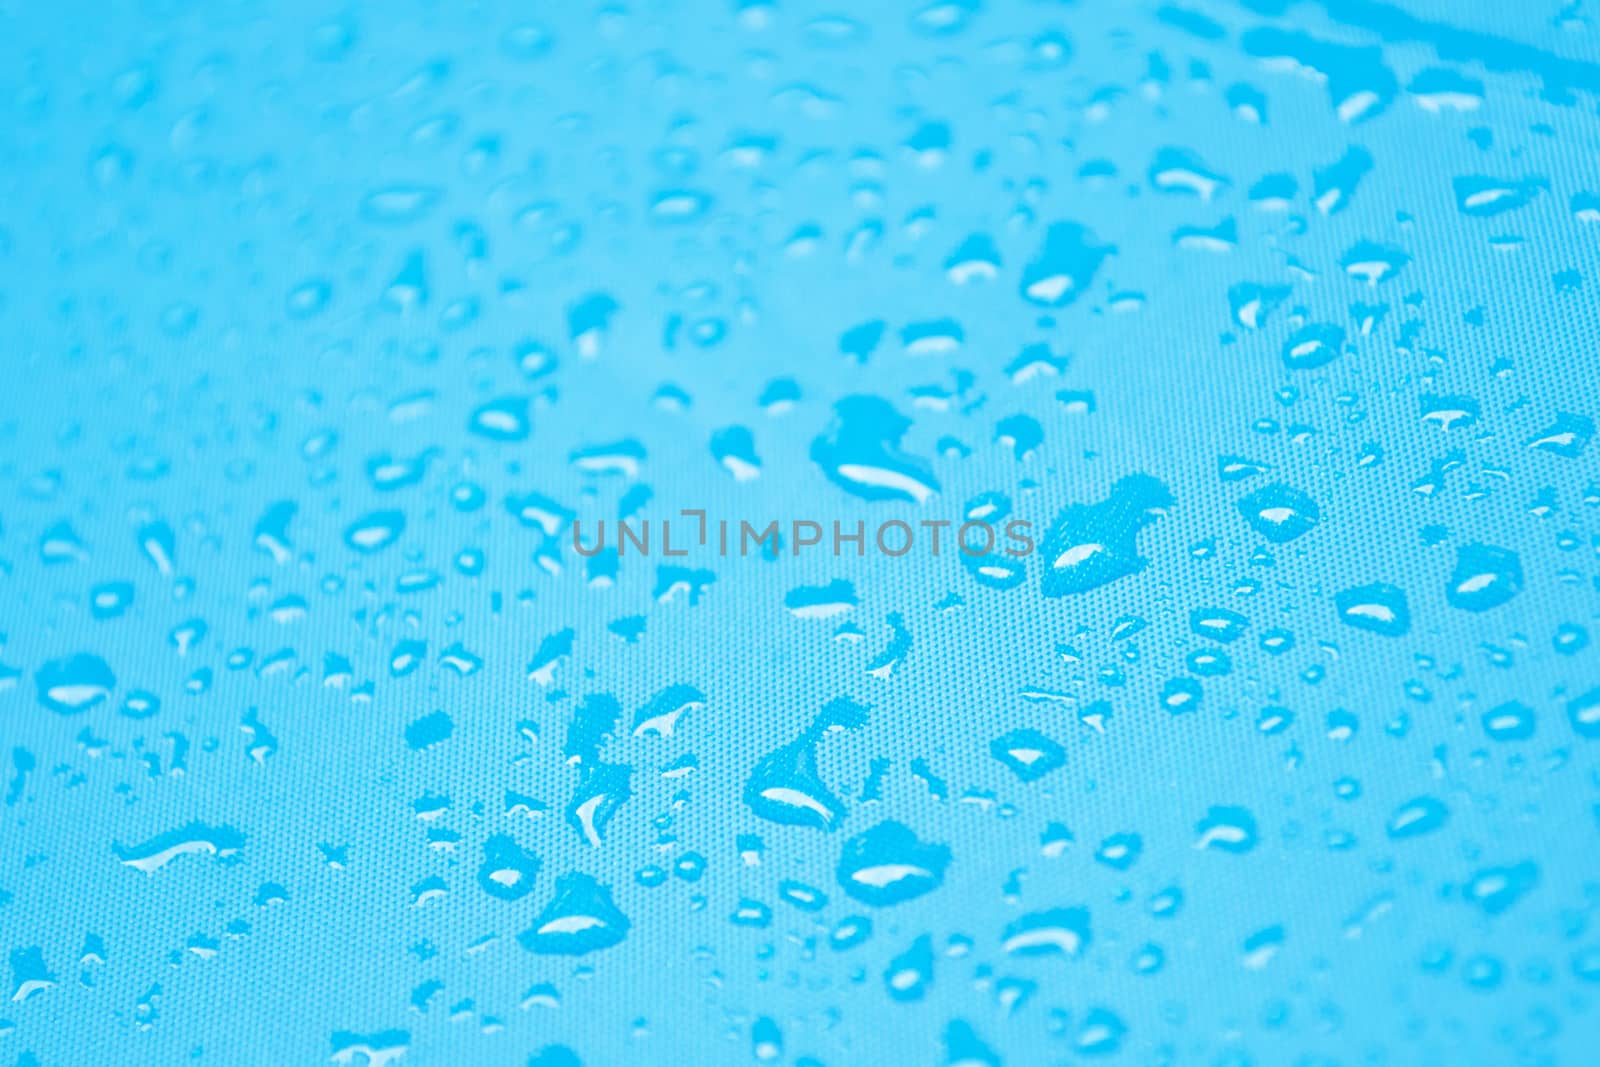 Water drops background, drops of water on the floor